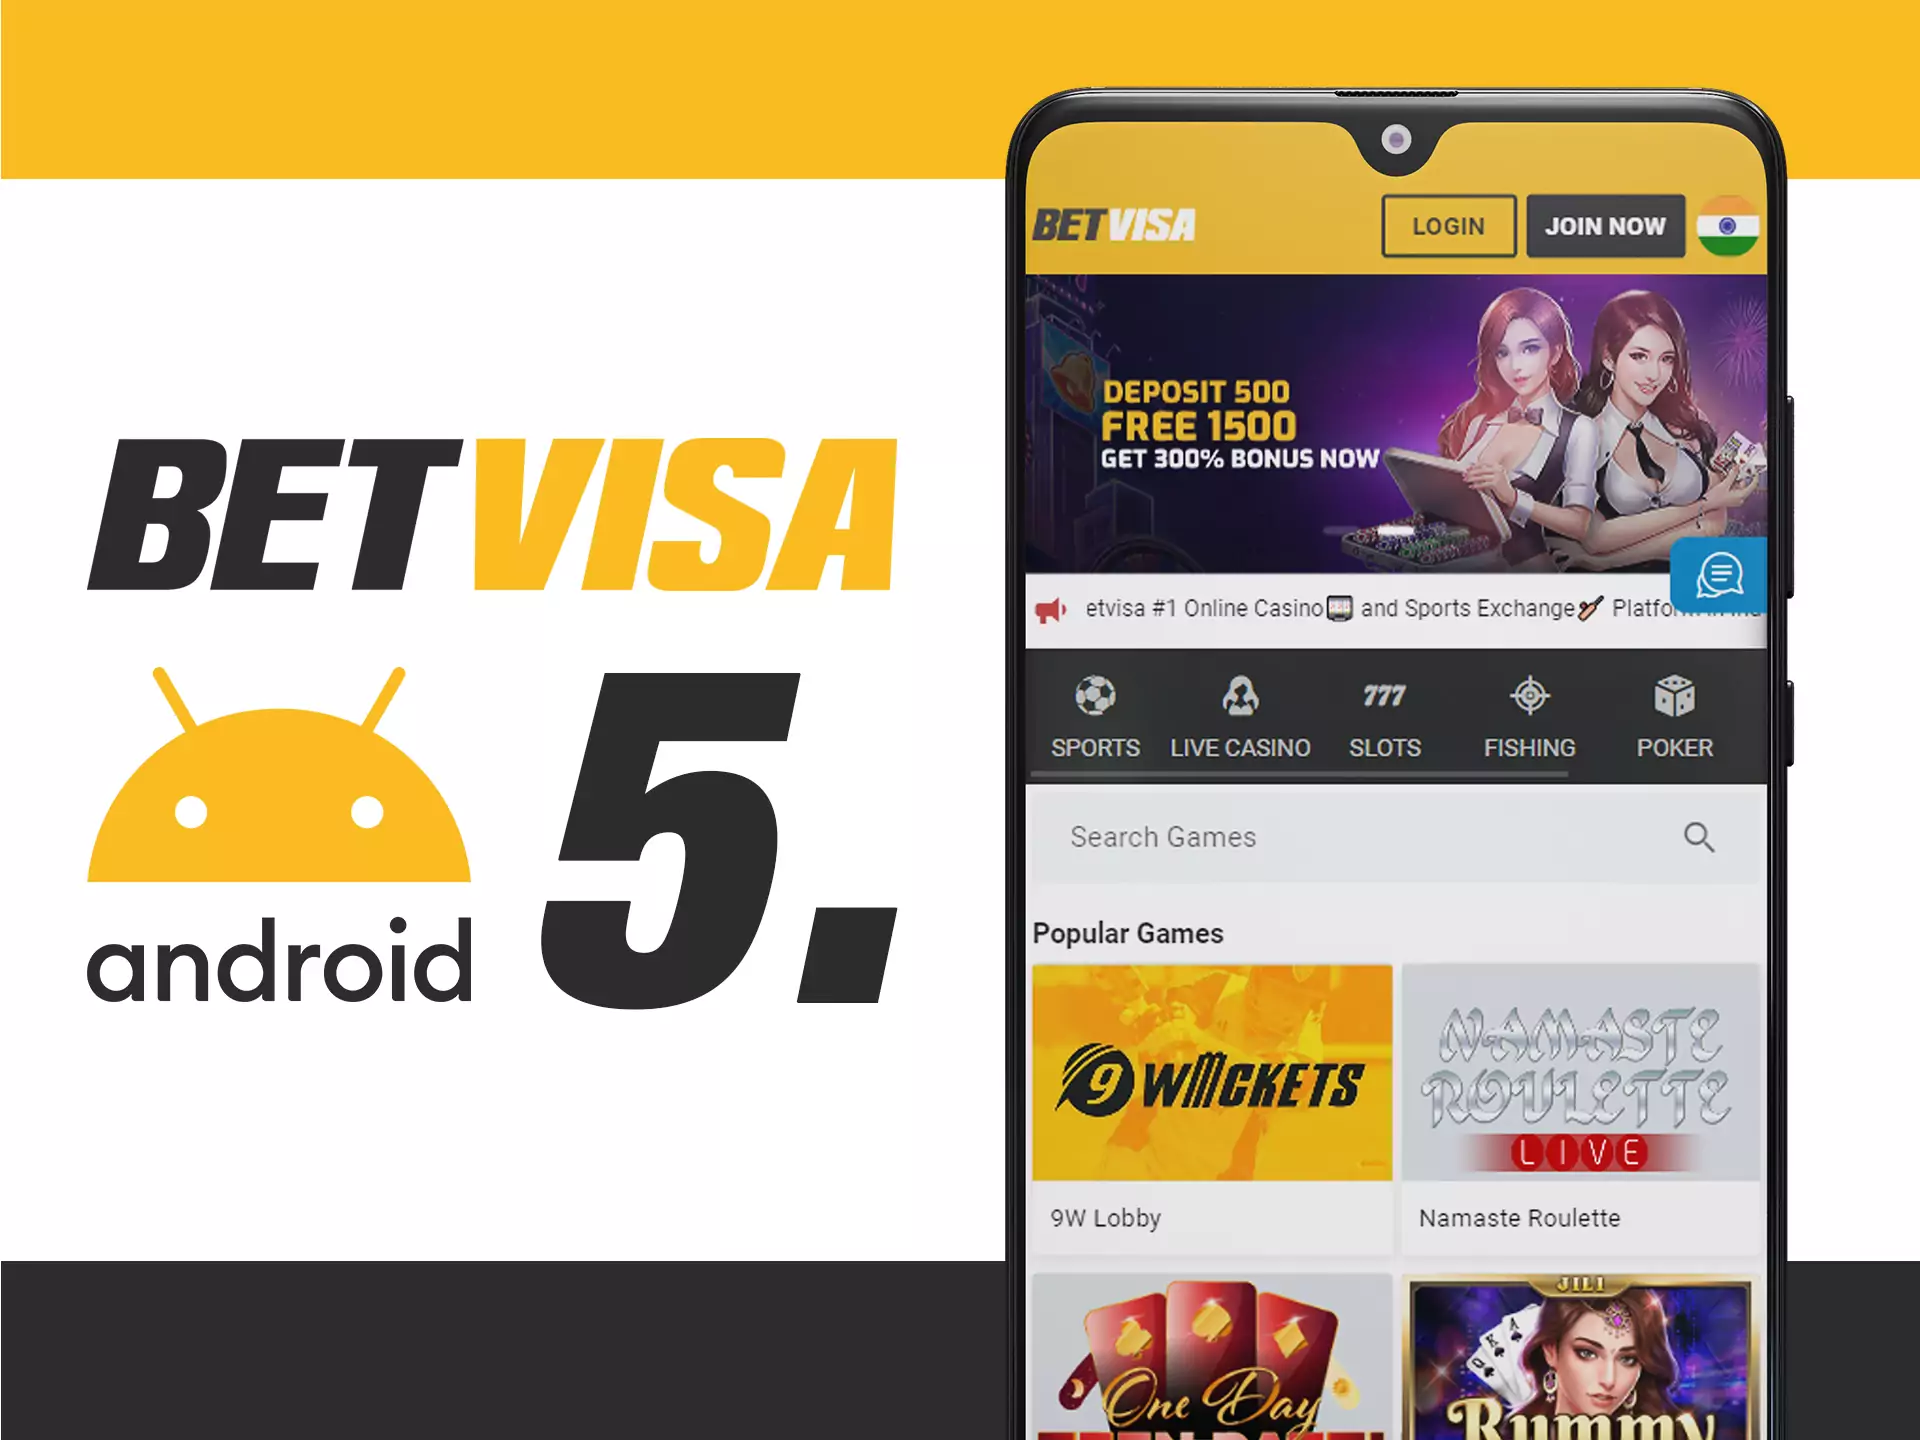 After successfully installing the Betvisa app on your Android device you can start betting.